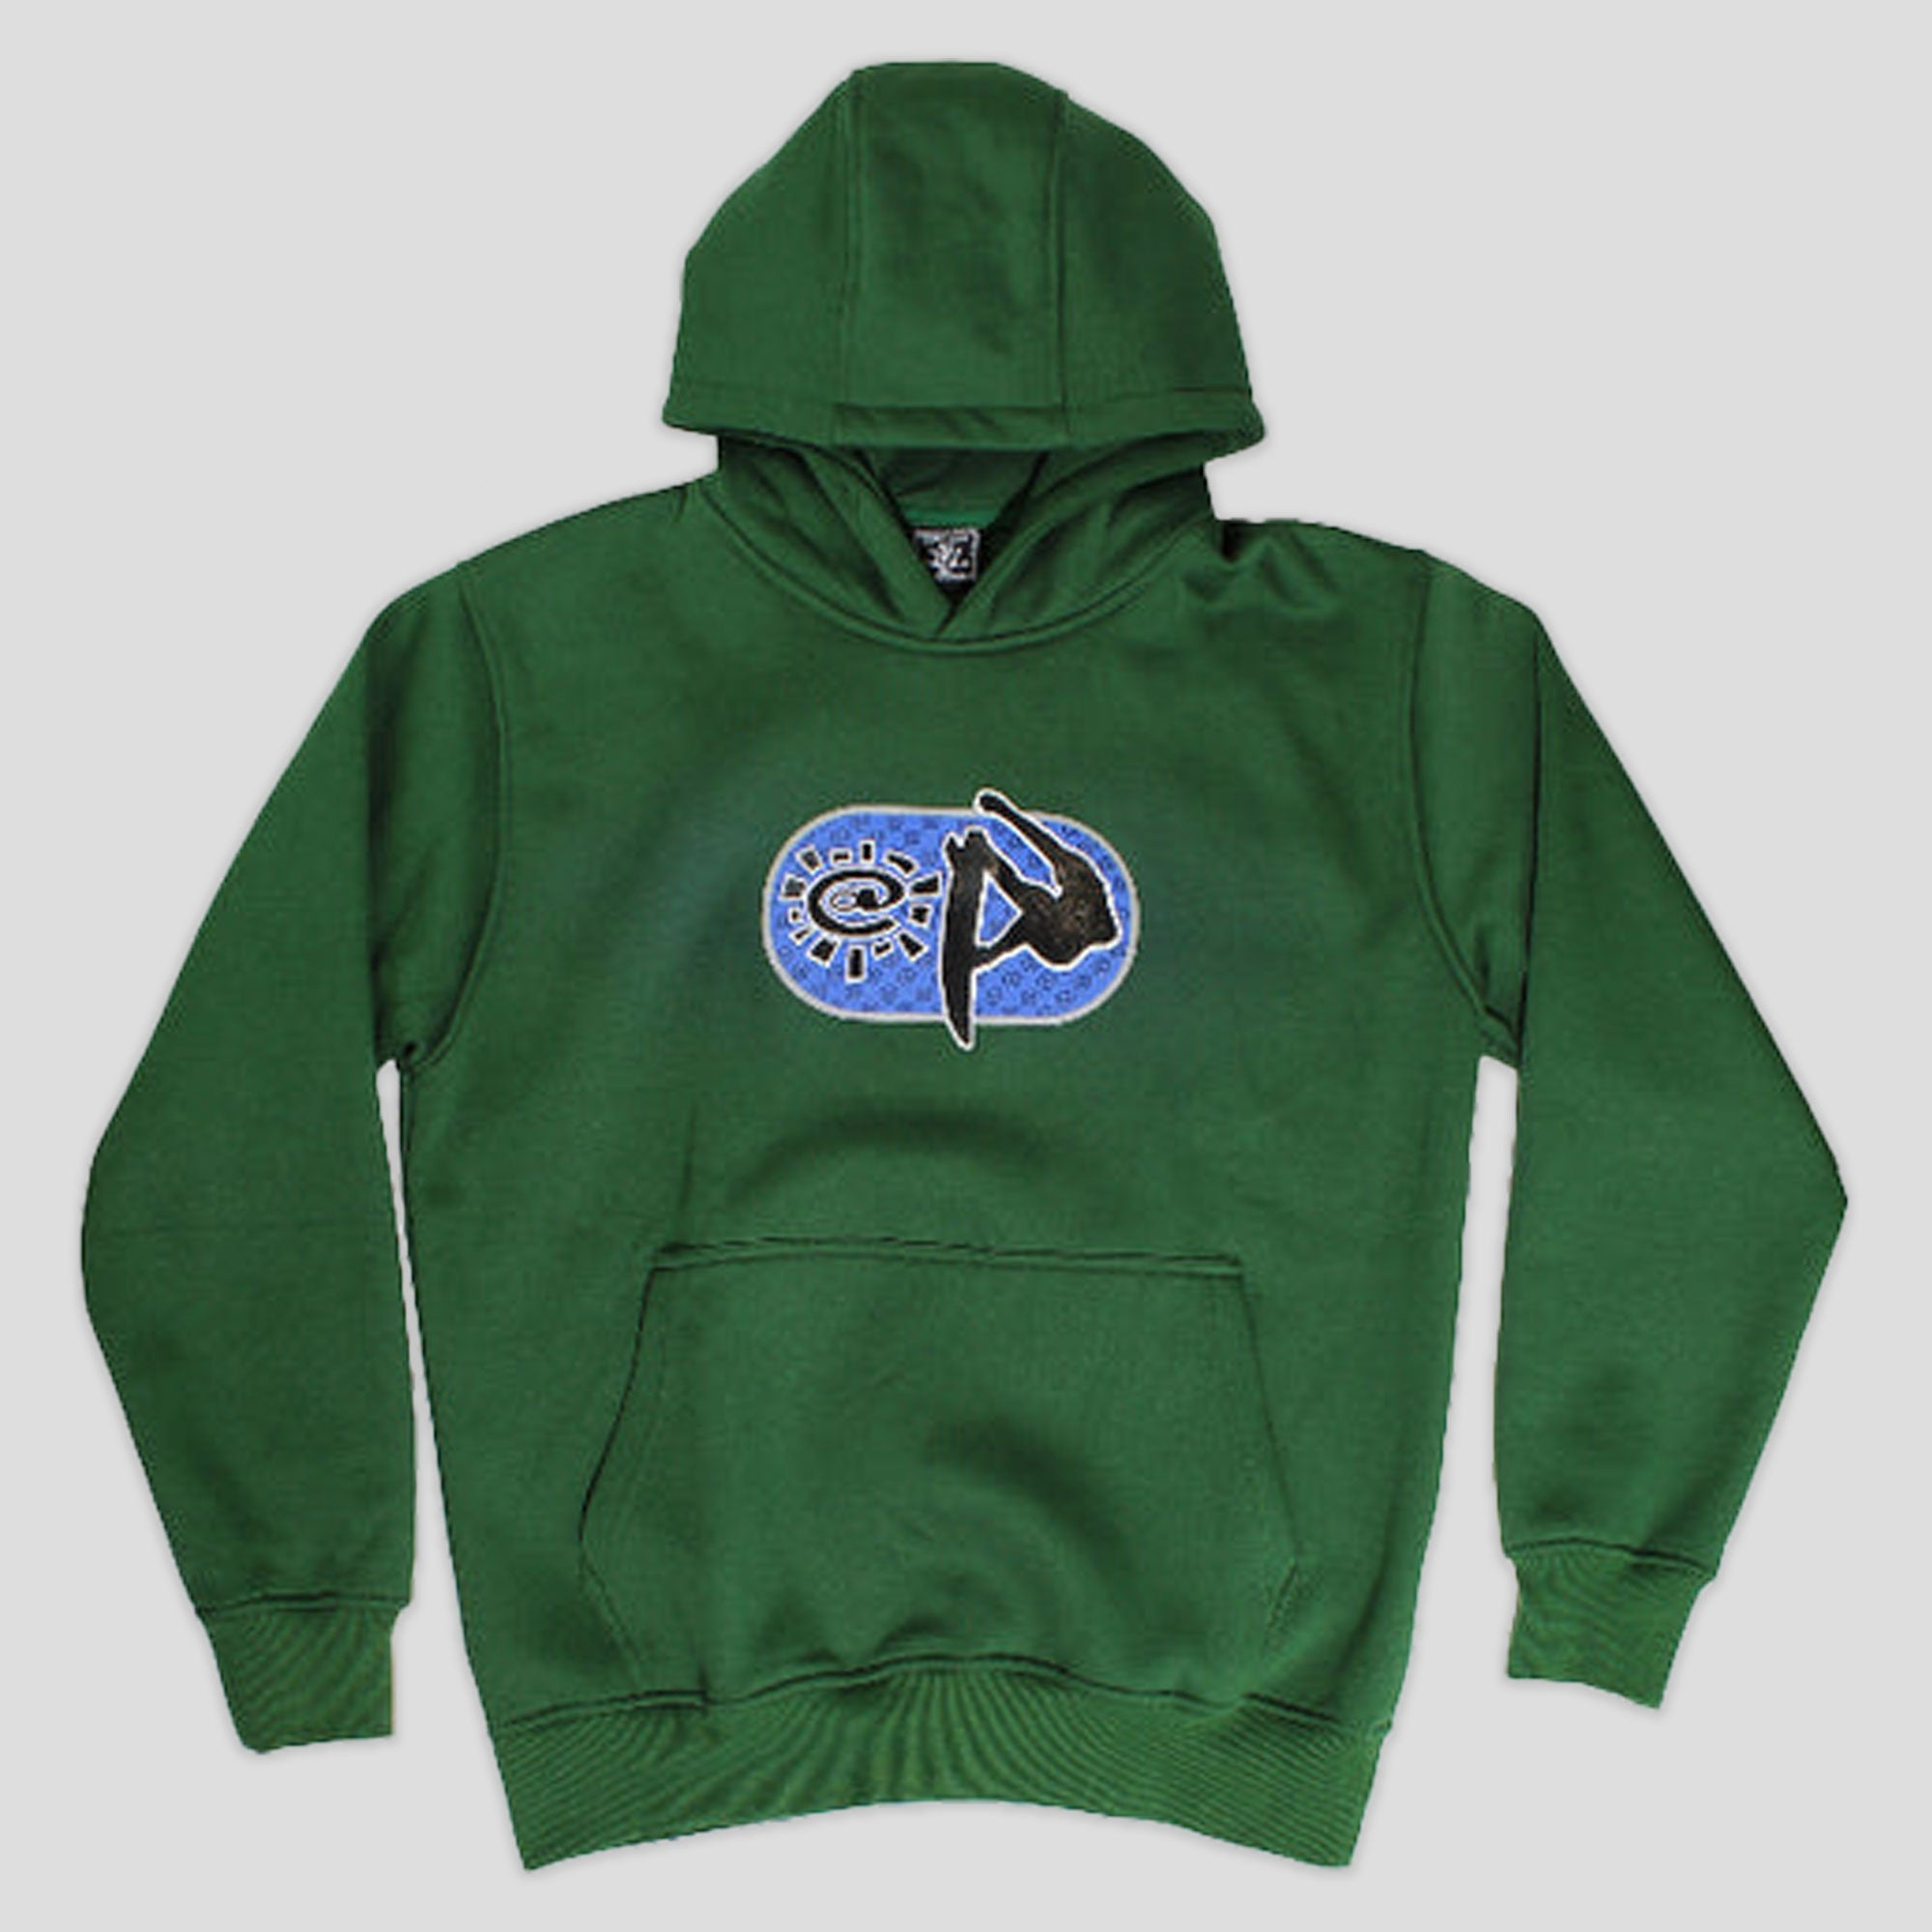 Always Do What You Should Do Mick Fanning Hoodie - Green